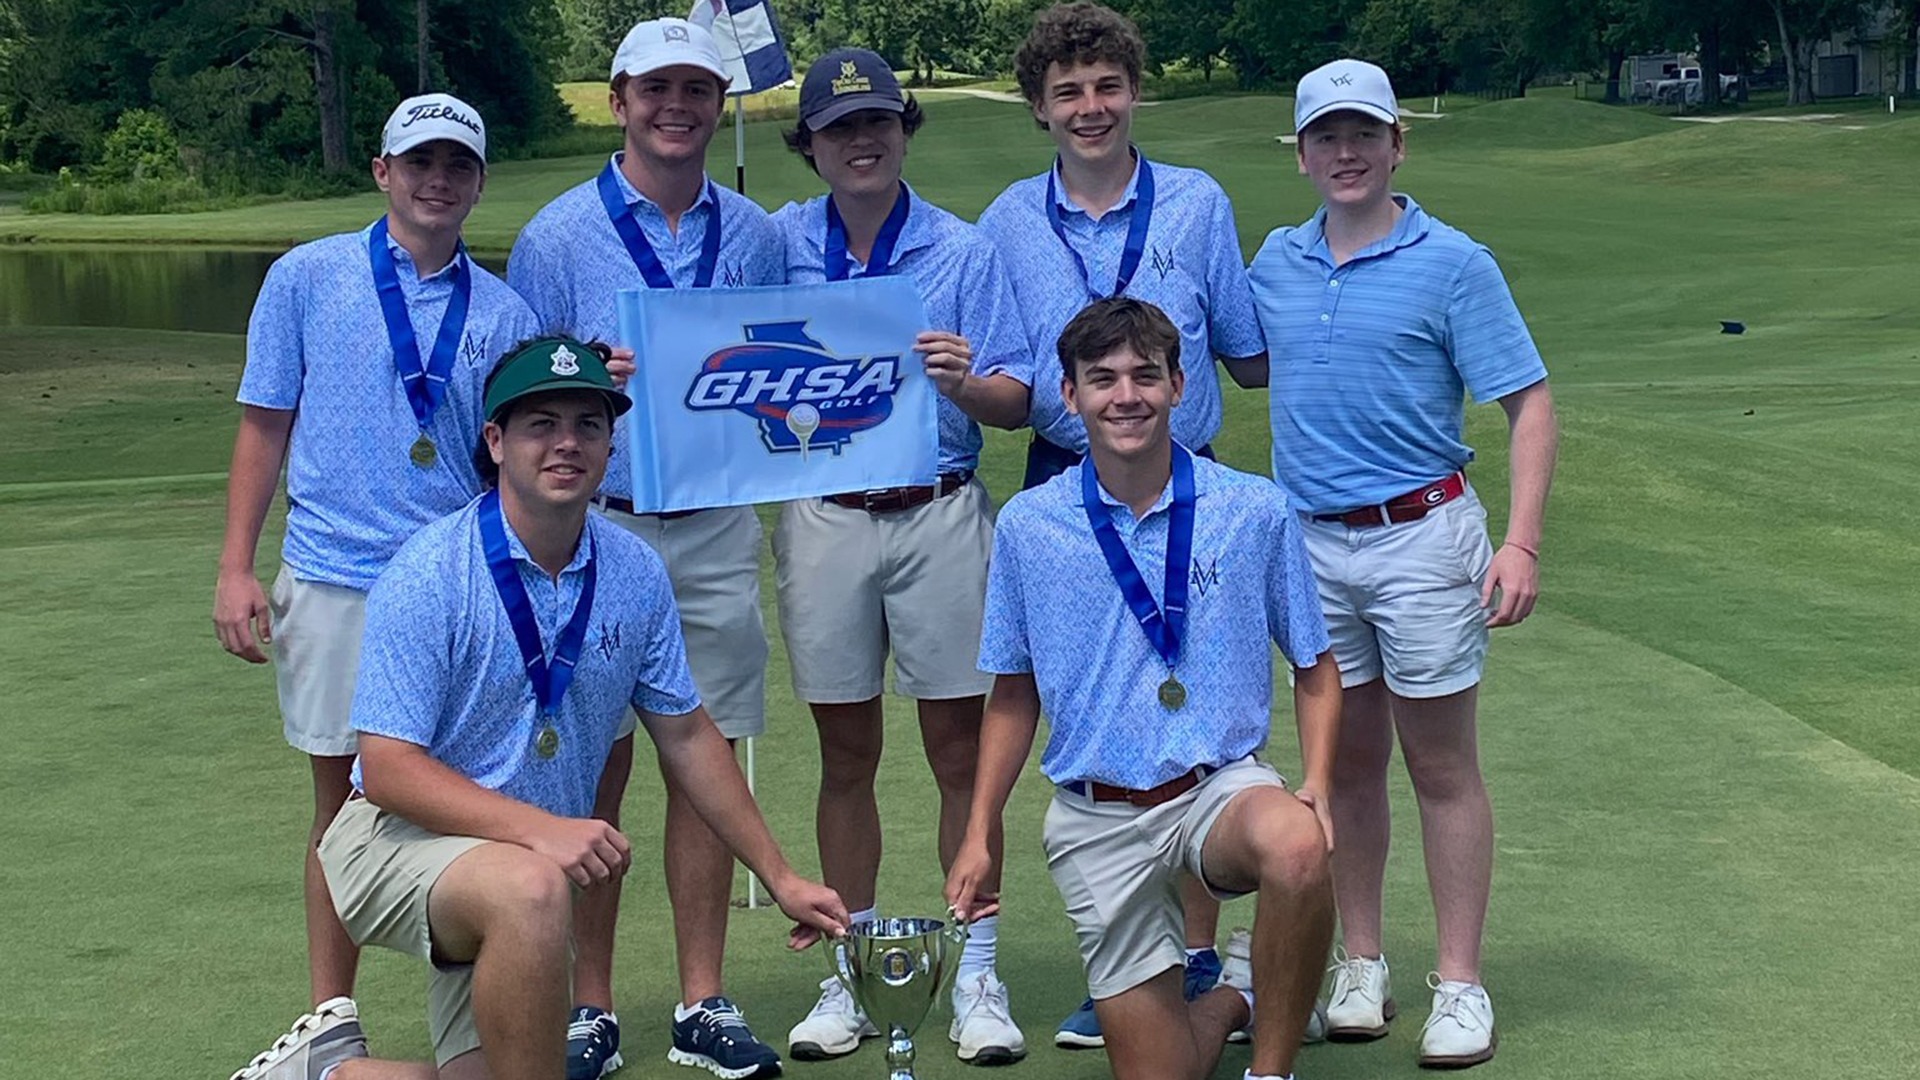 STATE CHAMPS! BOYS GOLF CLAIMS PROGRAM'S FIRST GHSA CHAMPIONSHIP